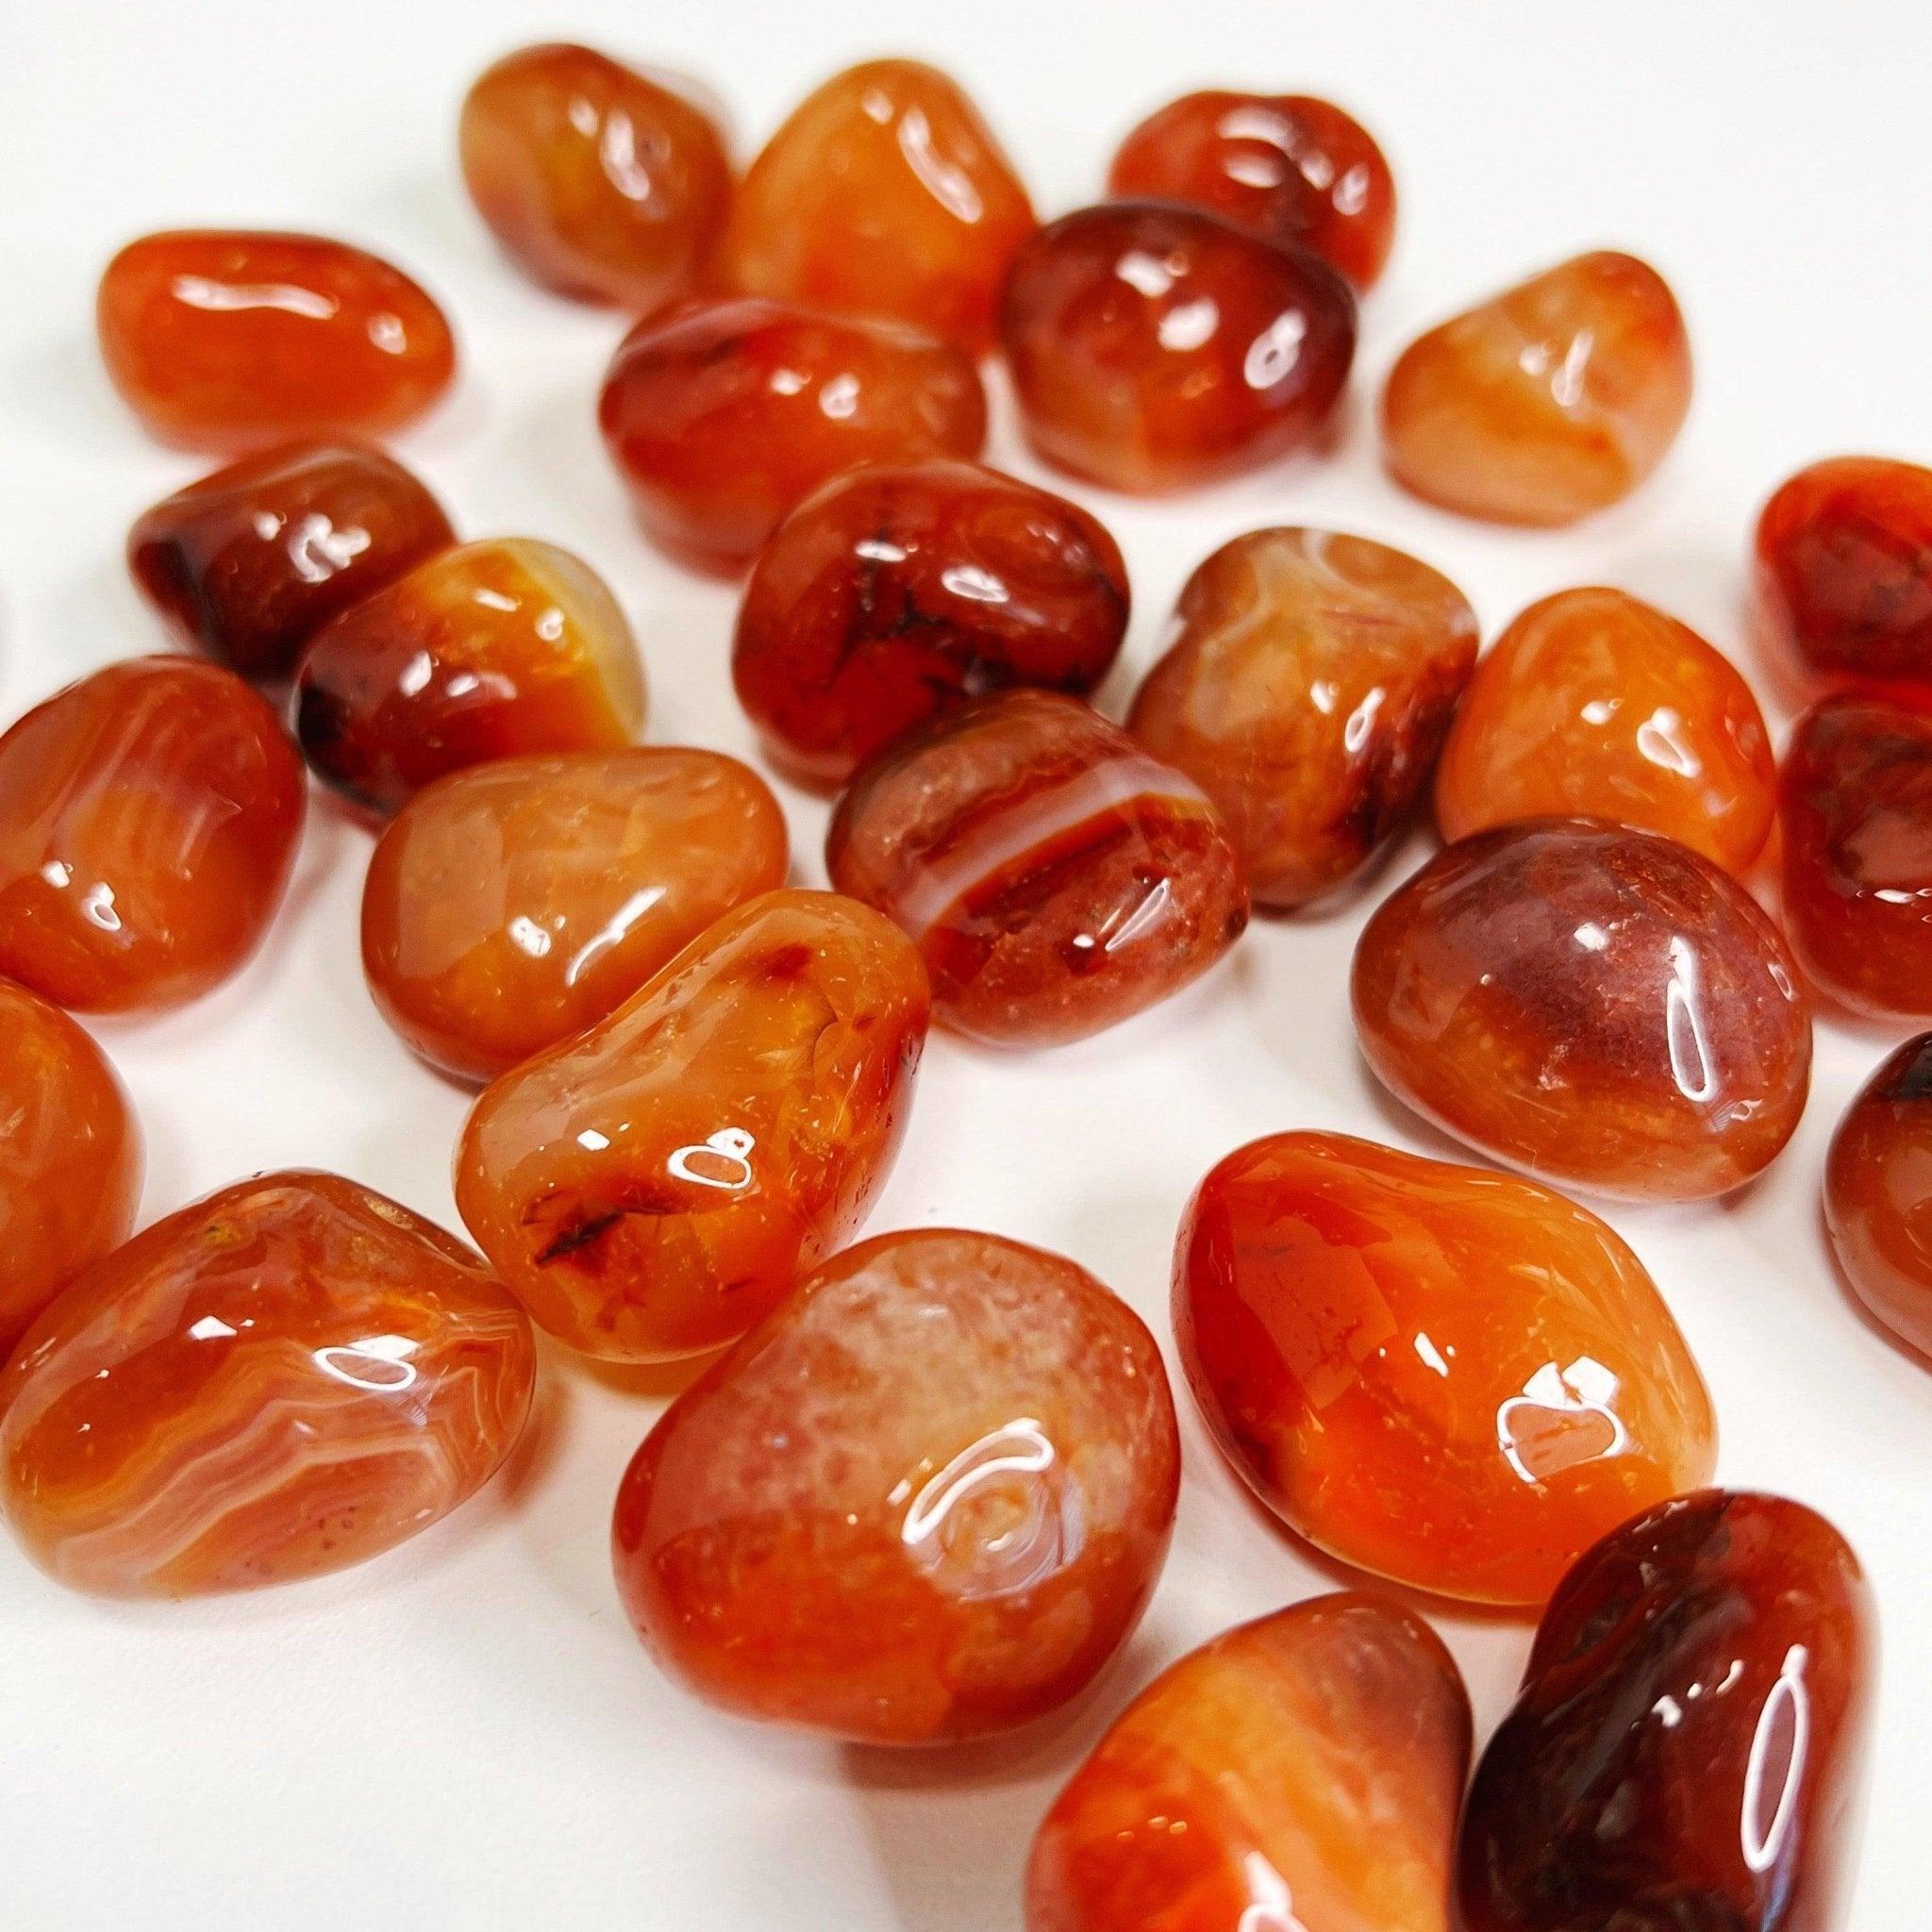 CARNELIAN TUMBLE - 33 bday, 444 sale, carnelian, emotional support, end of year sale, holiday sale, joy gift bundle, new year sale, pocket crystal, pocket stone, tumble, tumbled stone - The Mineral Maven